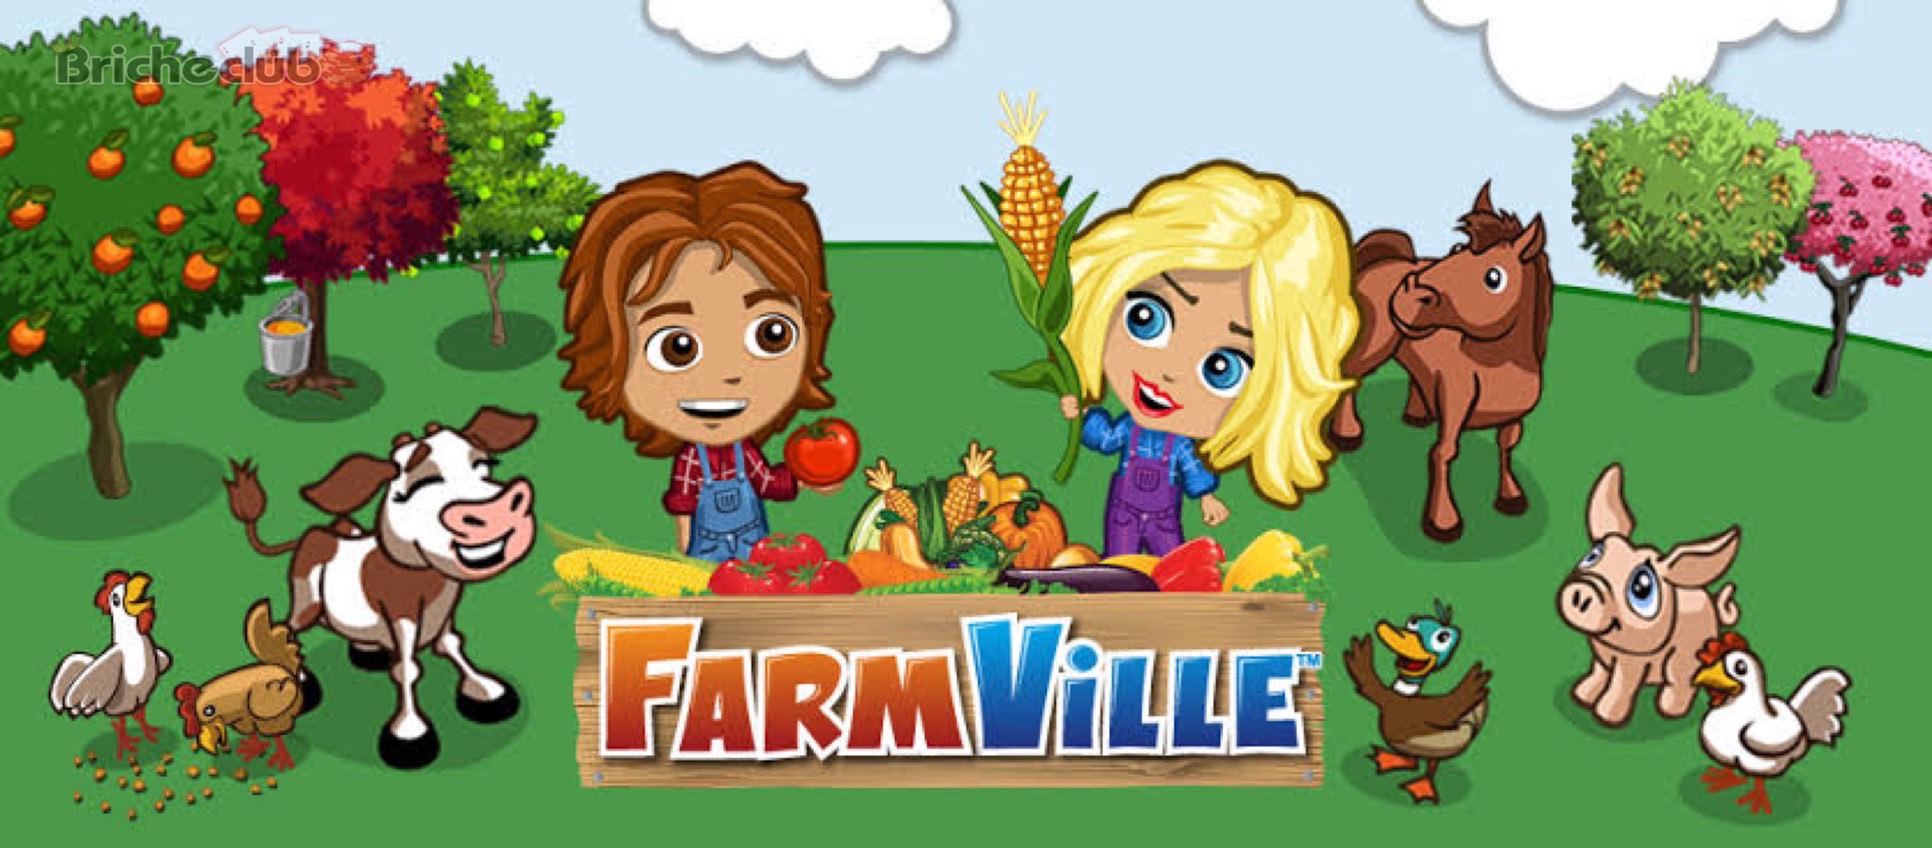 FarmVille Police - How to Get More!